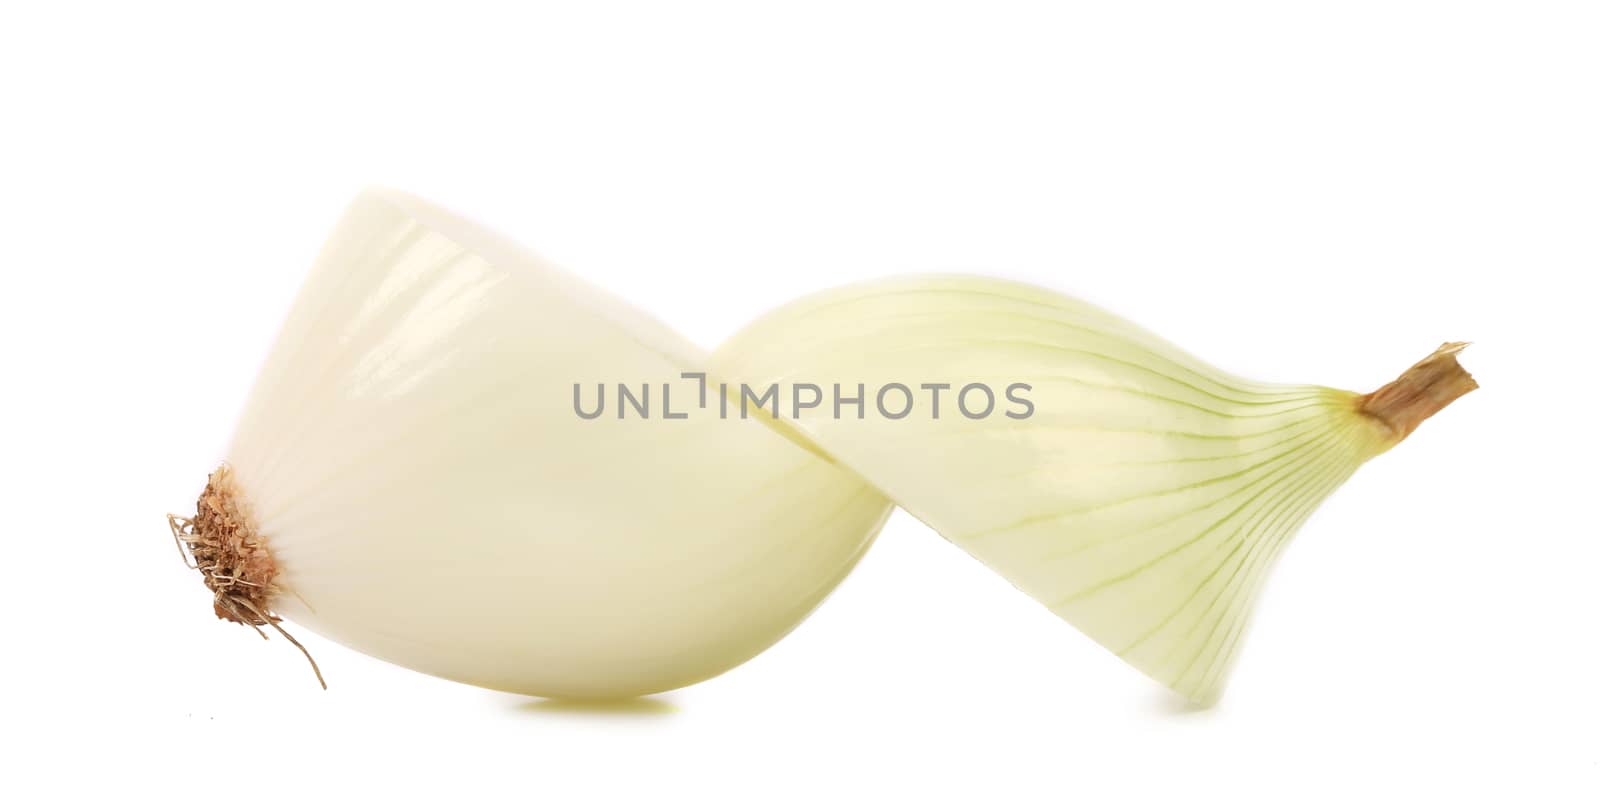 Splitted white onion. Isolated on a white background.